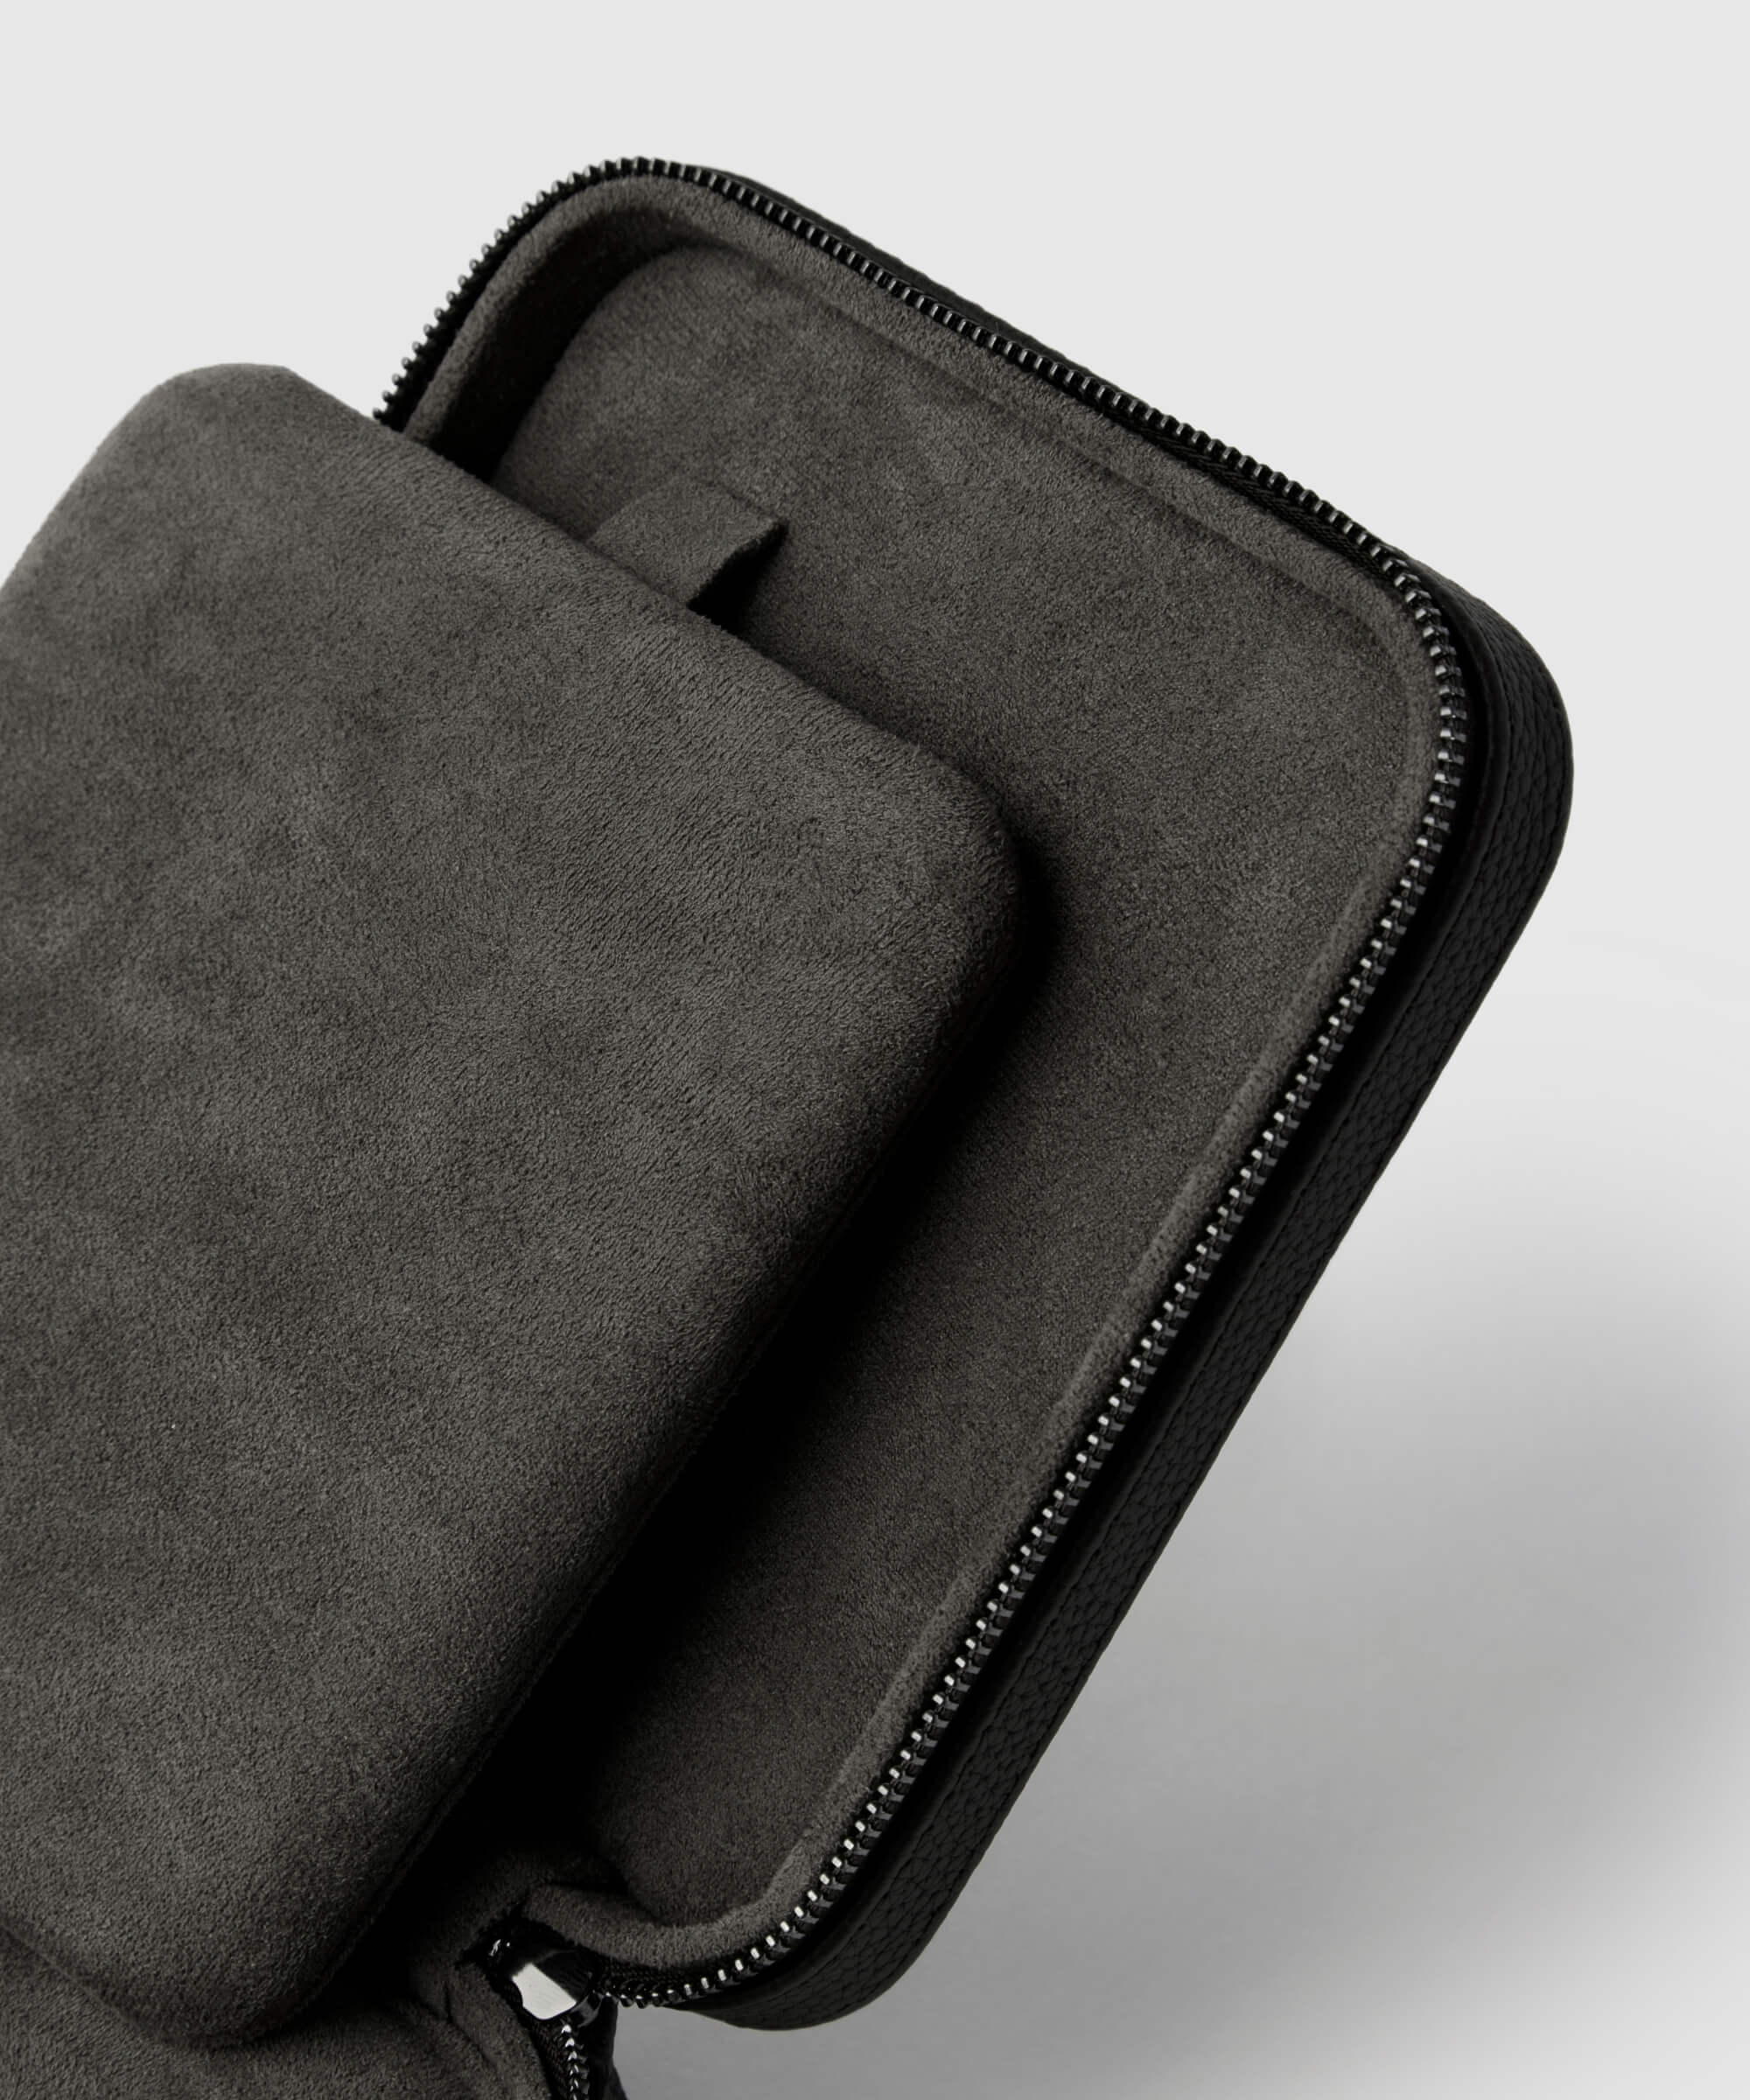 A close-up of an open TAWBURY Fraser 4 Watch Travel Case - Black (Coming Soon) with a fabric lining, showing the top lid and an inner compartment designed for elegant protection.